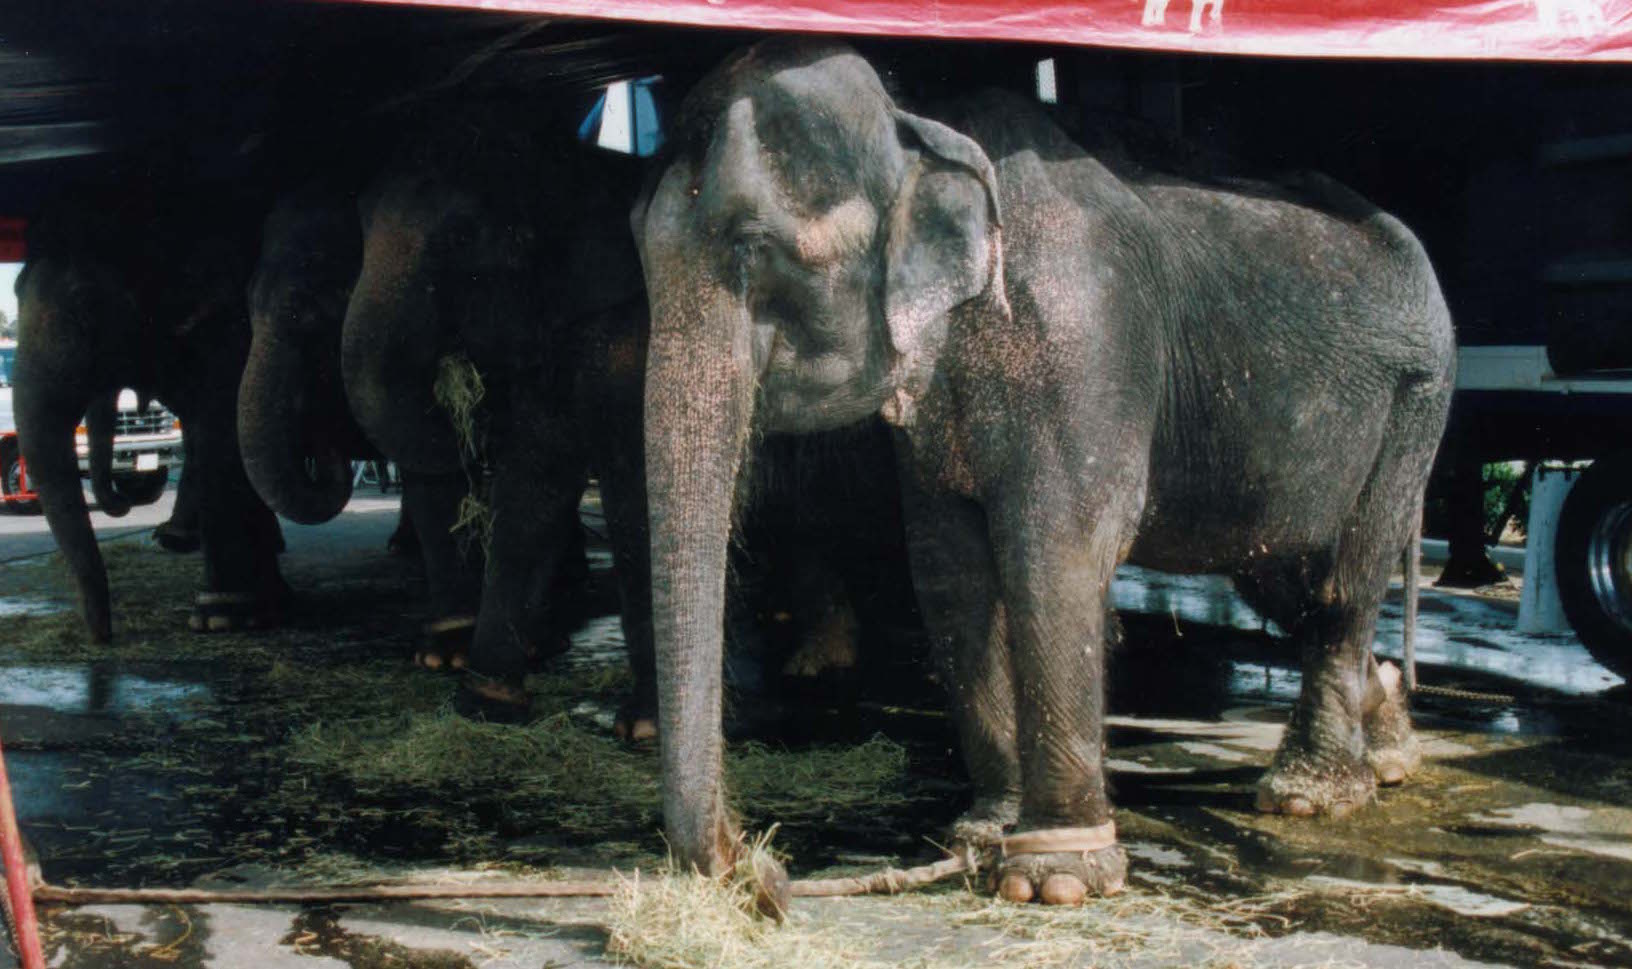 Last Chance for Animals - Circuses